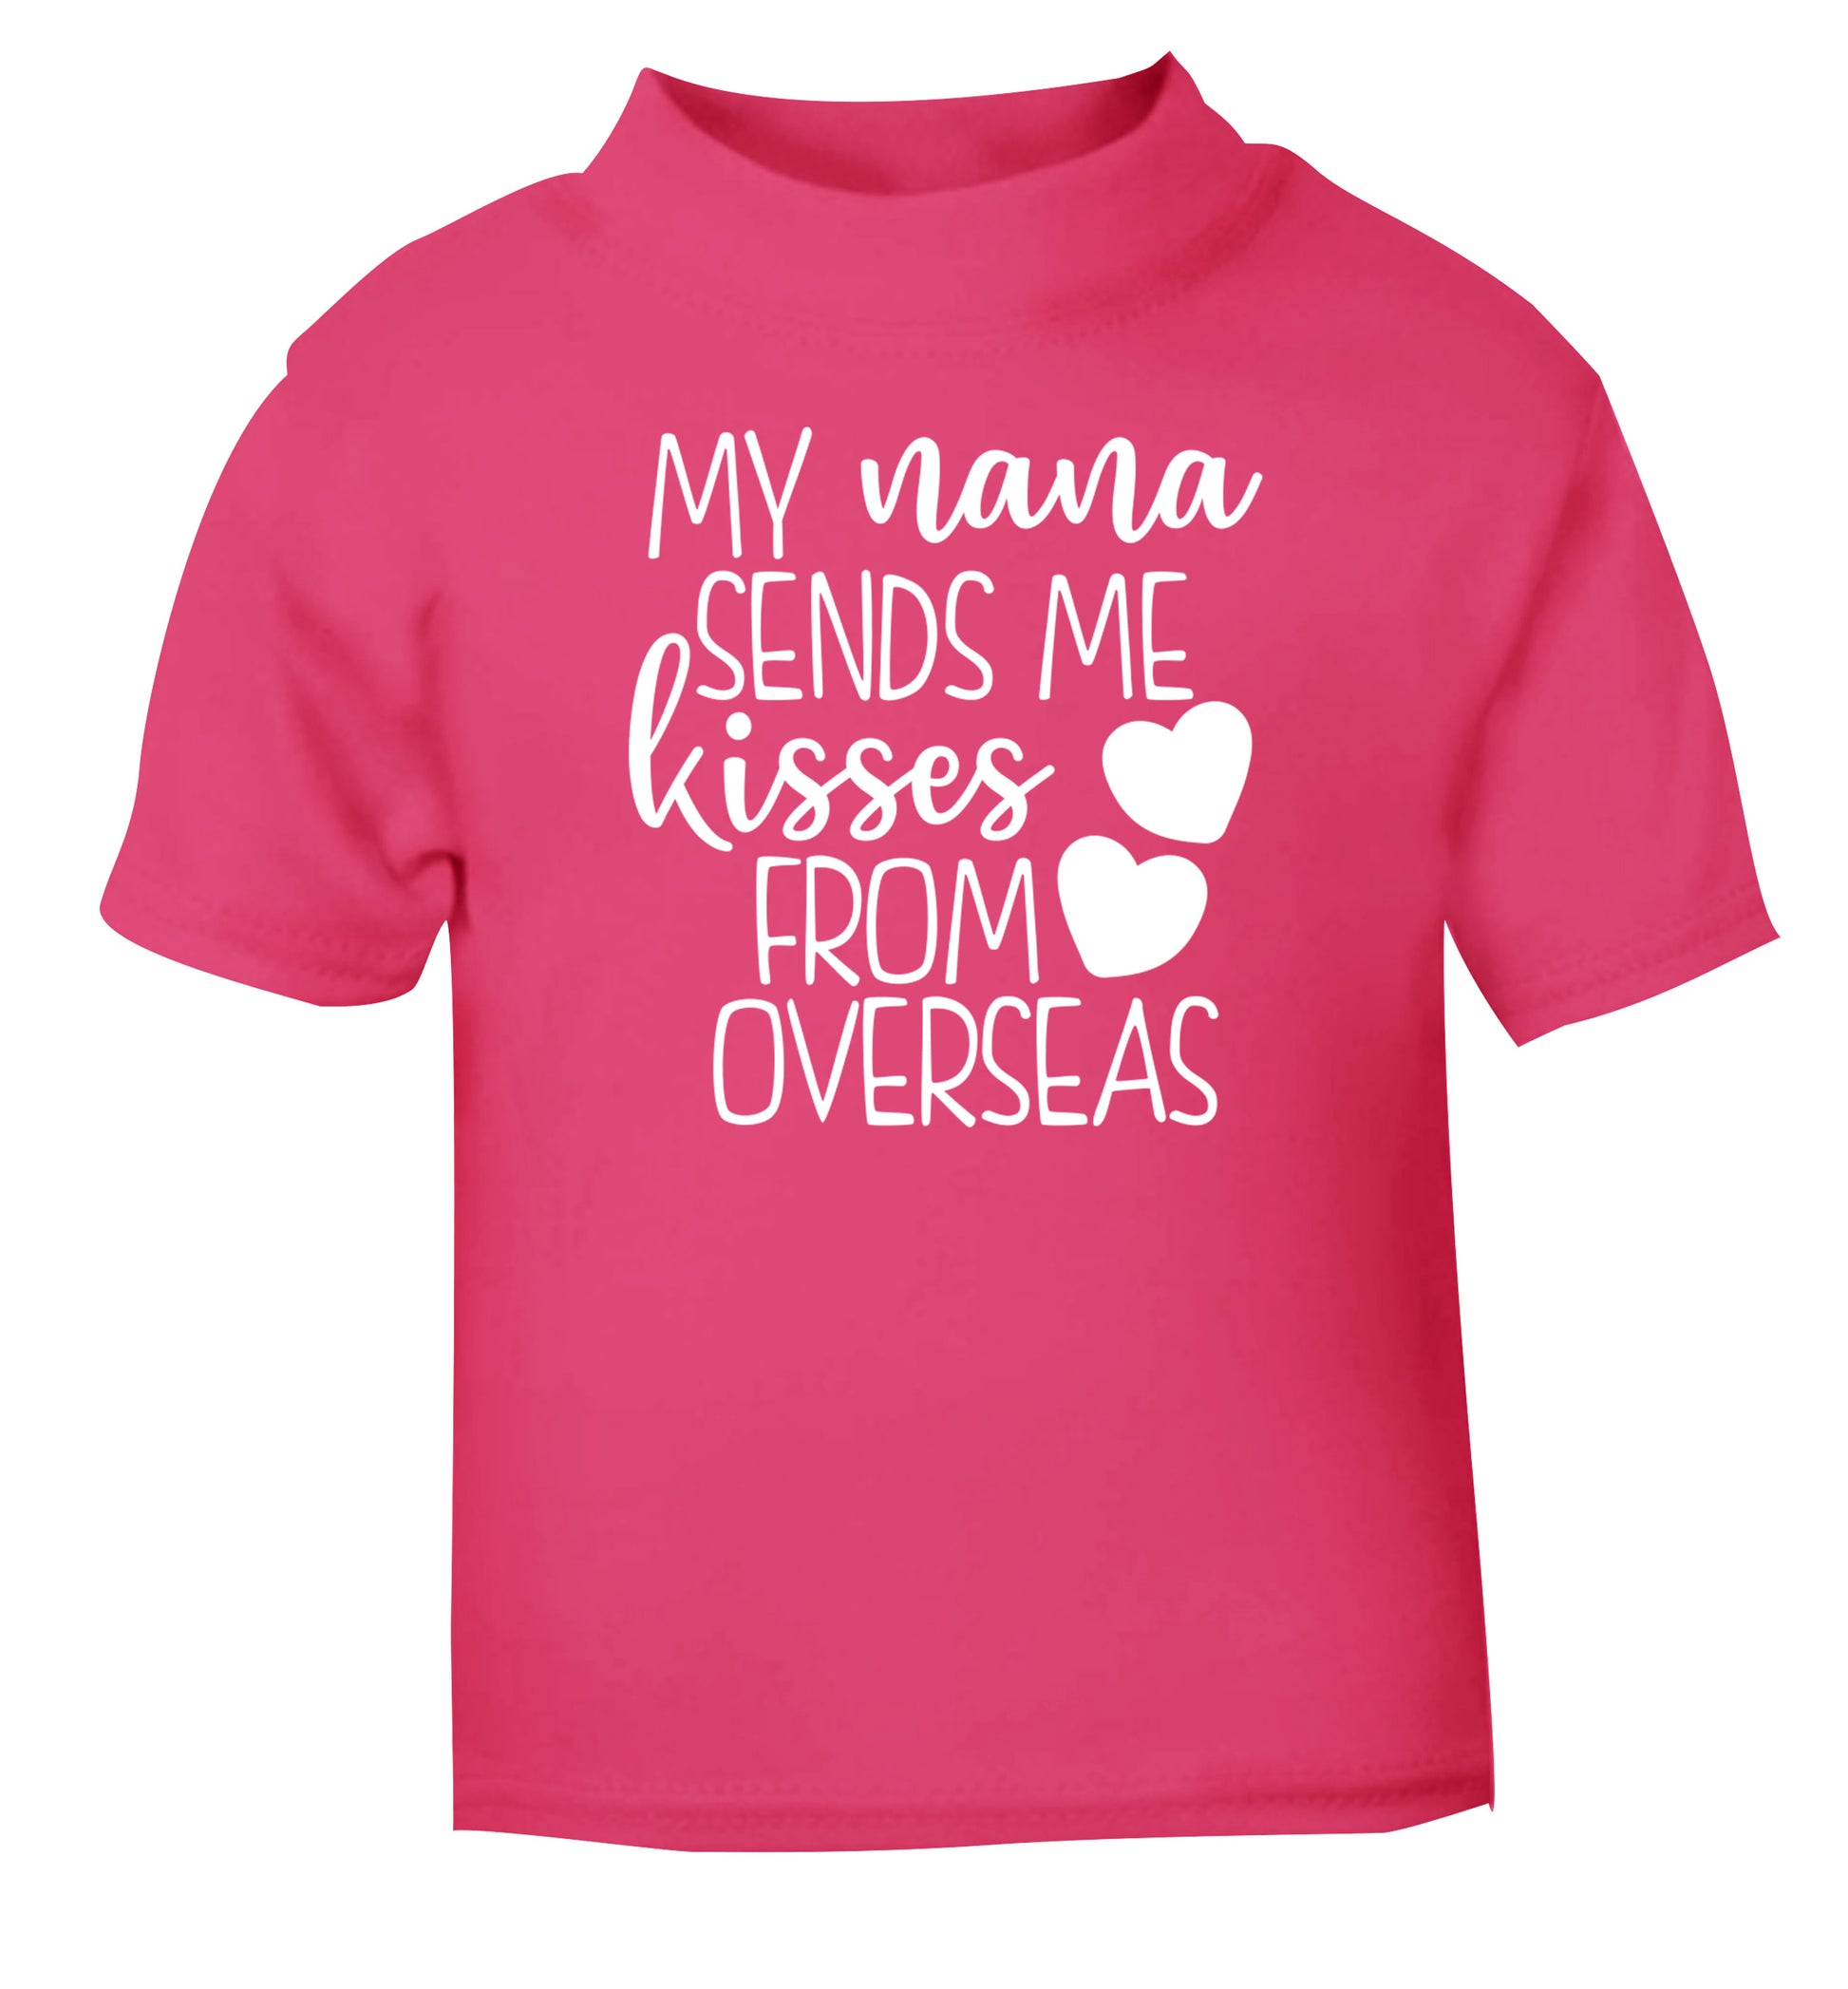 My nana sends me kisses from overseas pink Baby Toddler Tshirt 2 Years